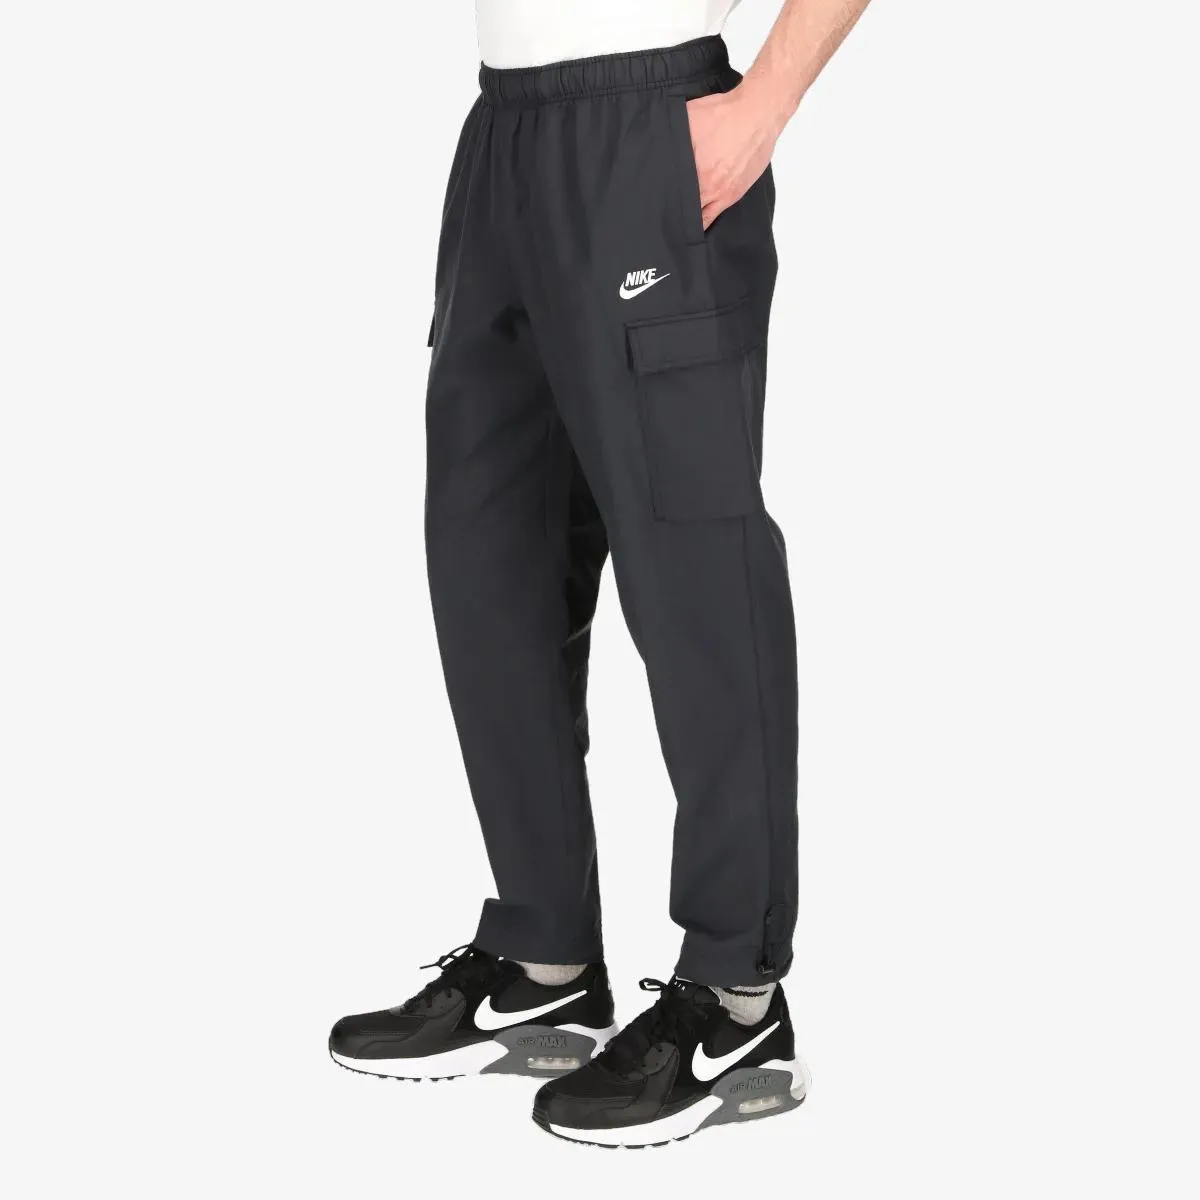 Nike ODJECA D.DIO M NSW CE PANT CF WVN PLAYERS 